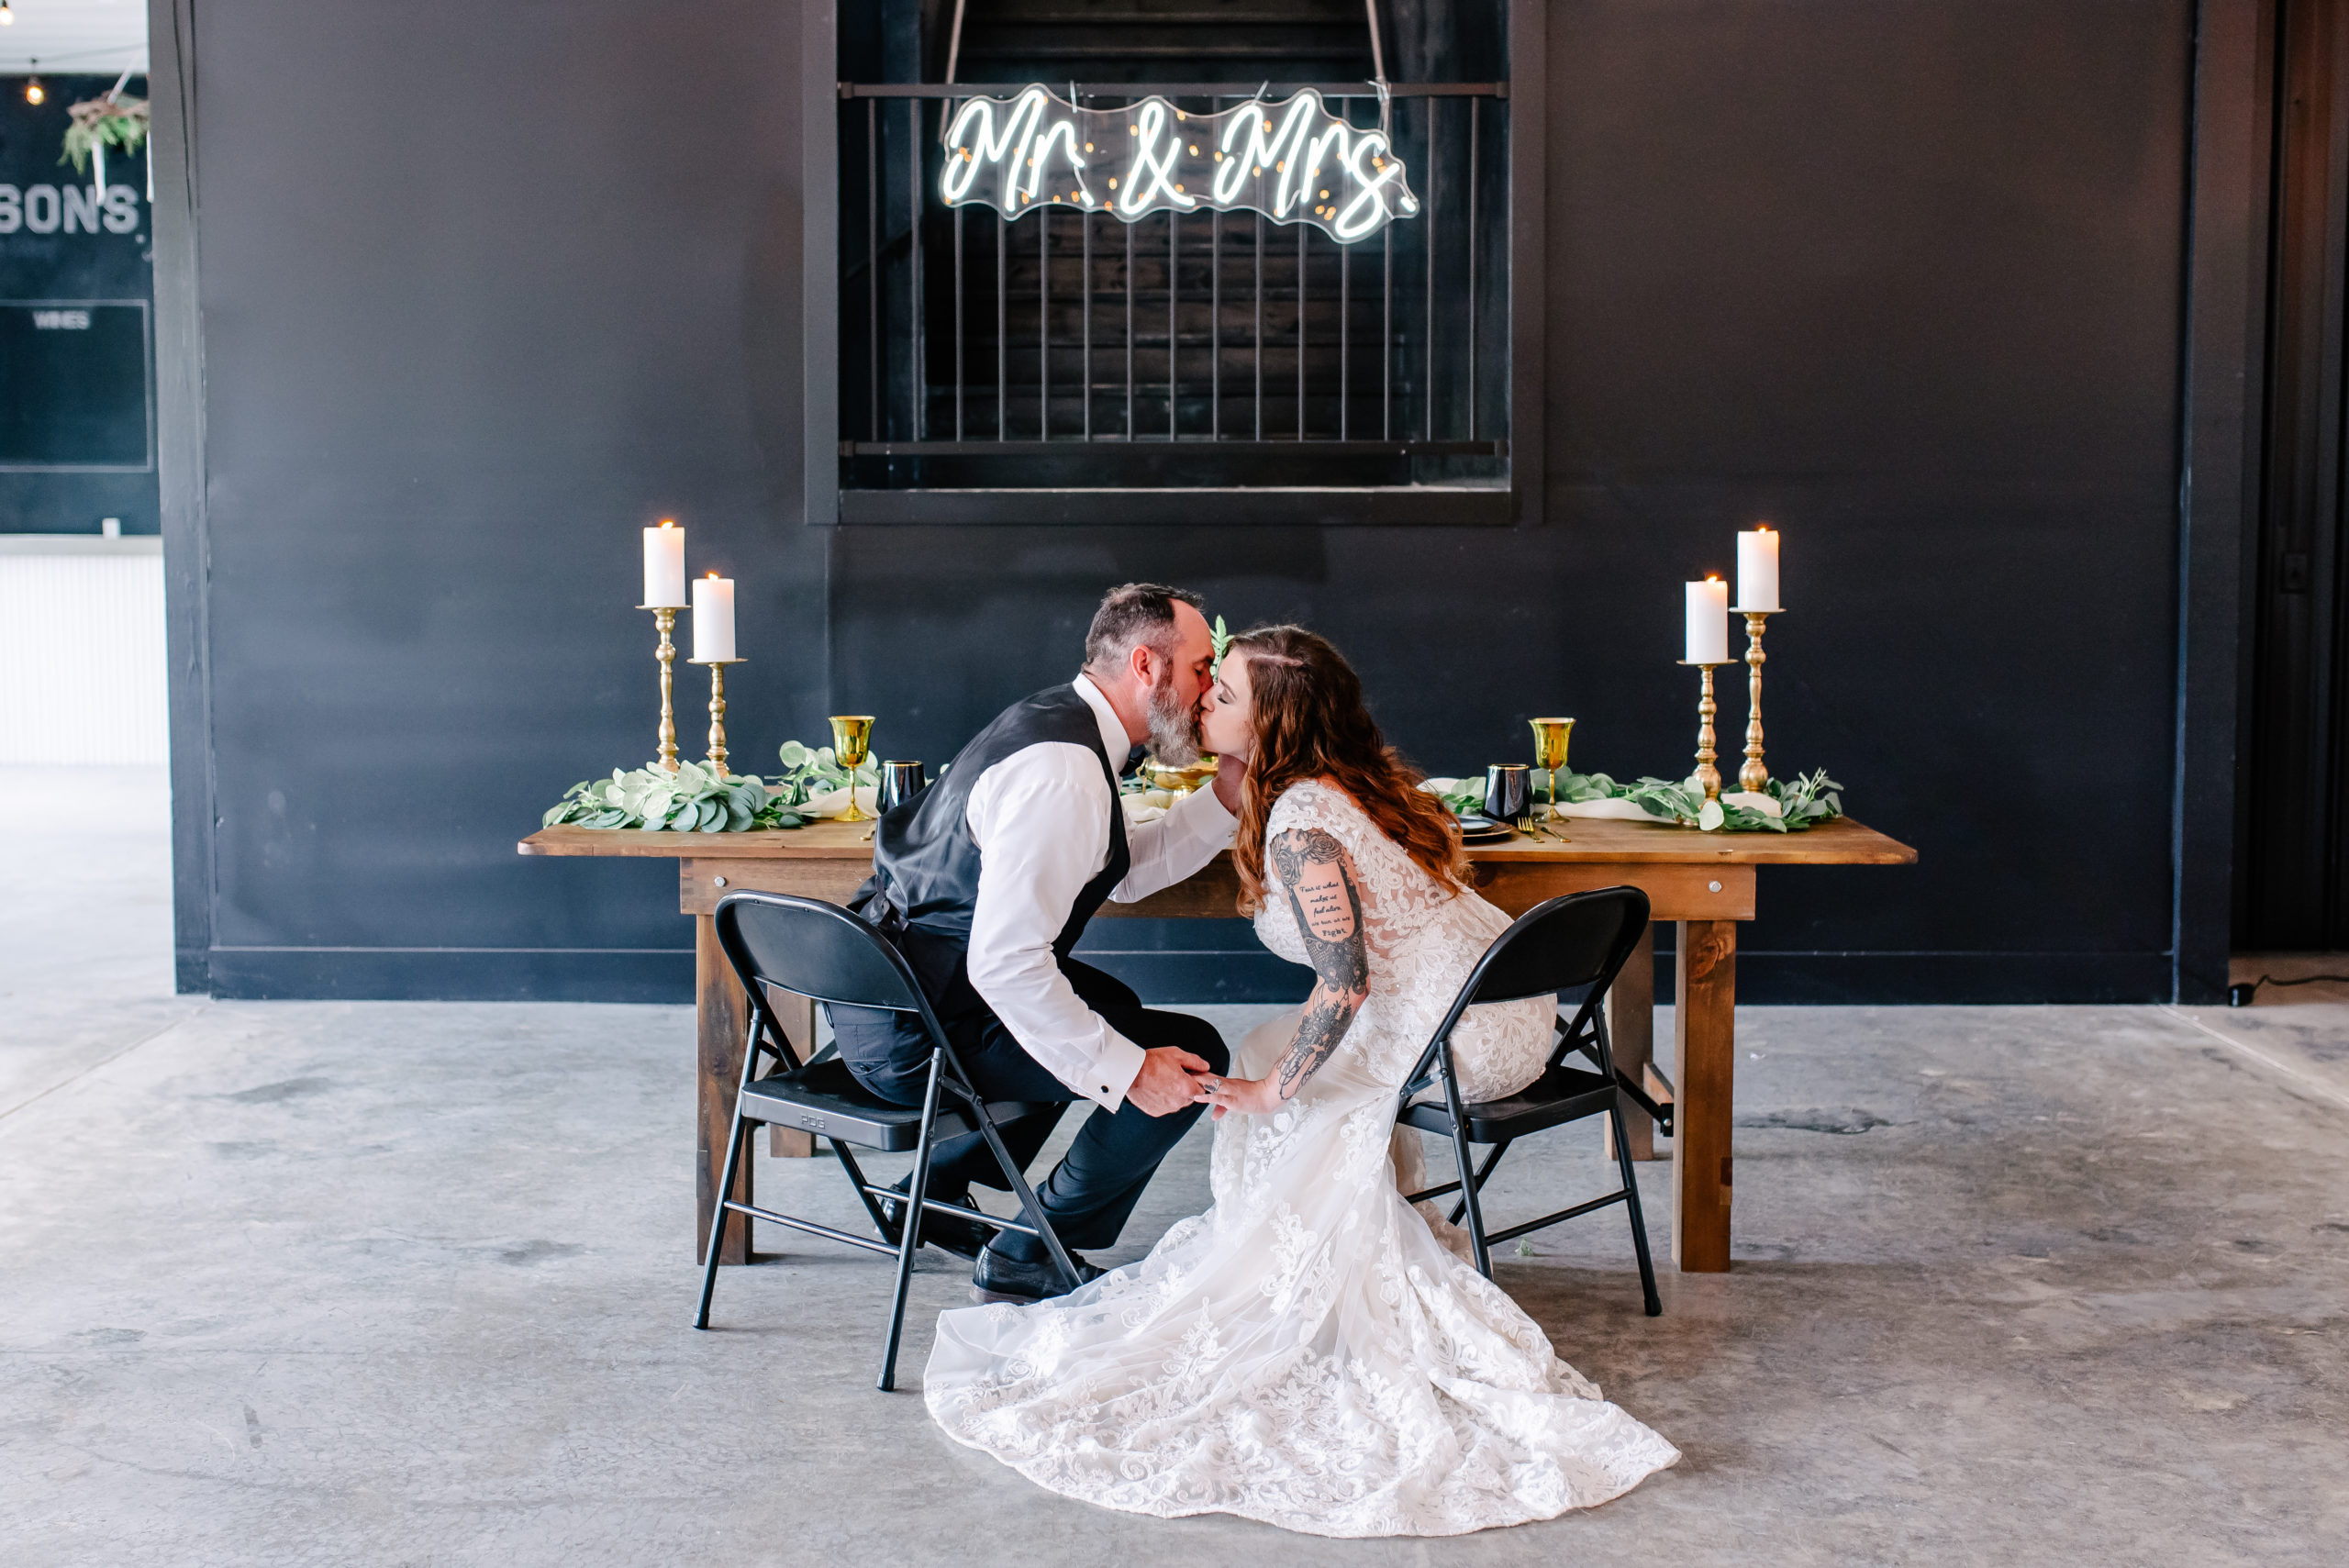 An edgy bride and groom kiss at their sweetheart table with a Mr. & Mrs. neon sign behind them.